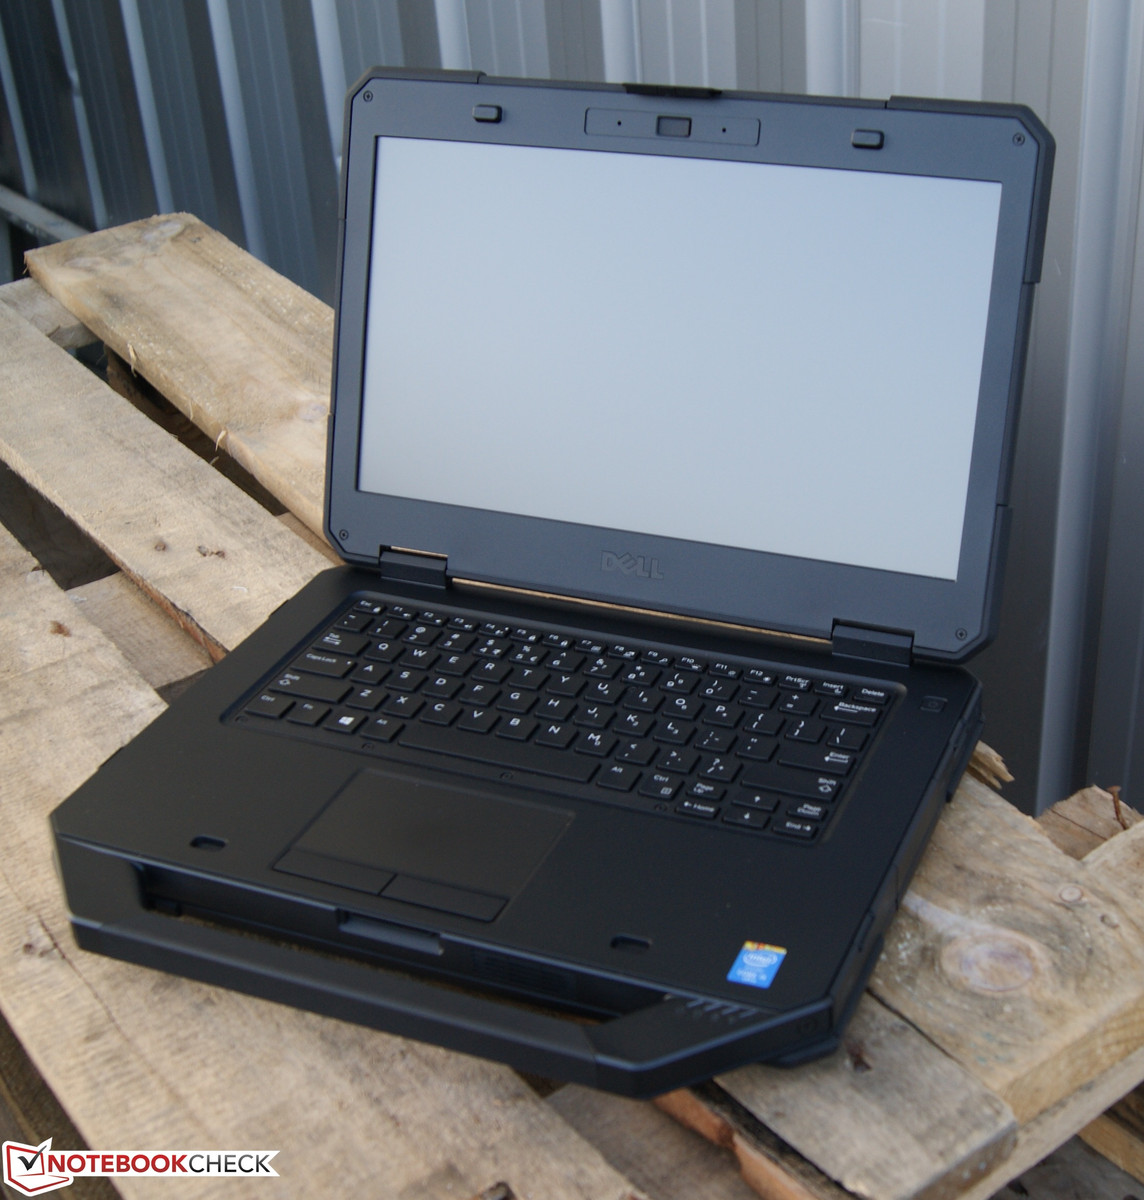 Dell Latitude 14 Rugged 5404 Notebook Review - NotebookCheck.net Reviews